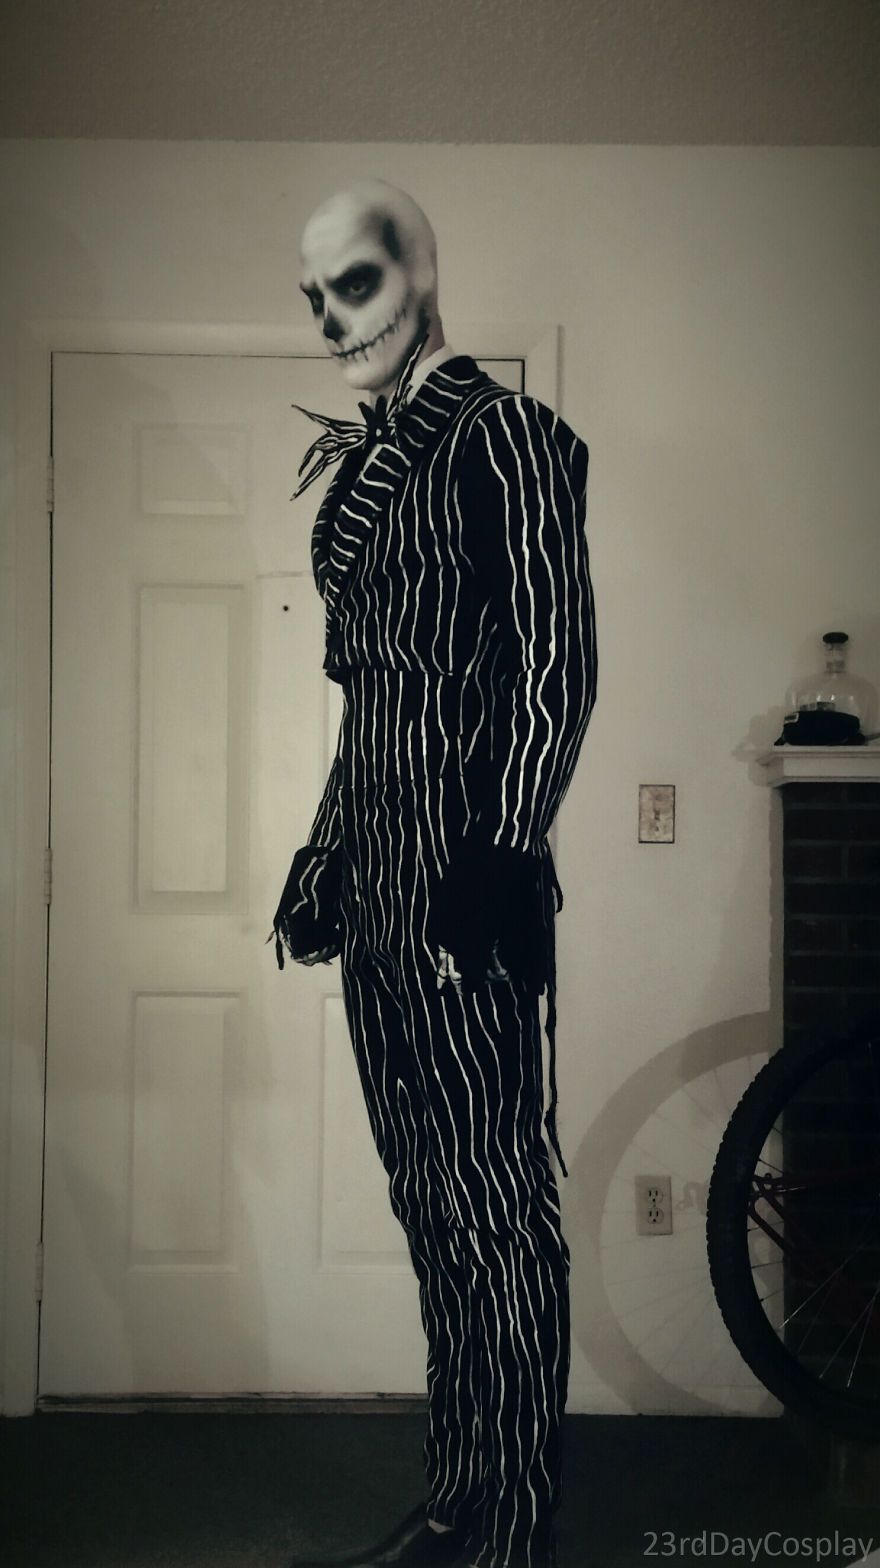 My DIY Jack Skellington Cosplay Inspired By A Movie I Haven't Seen